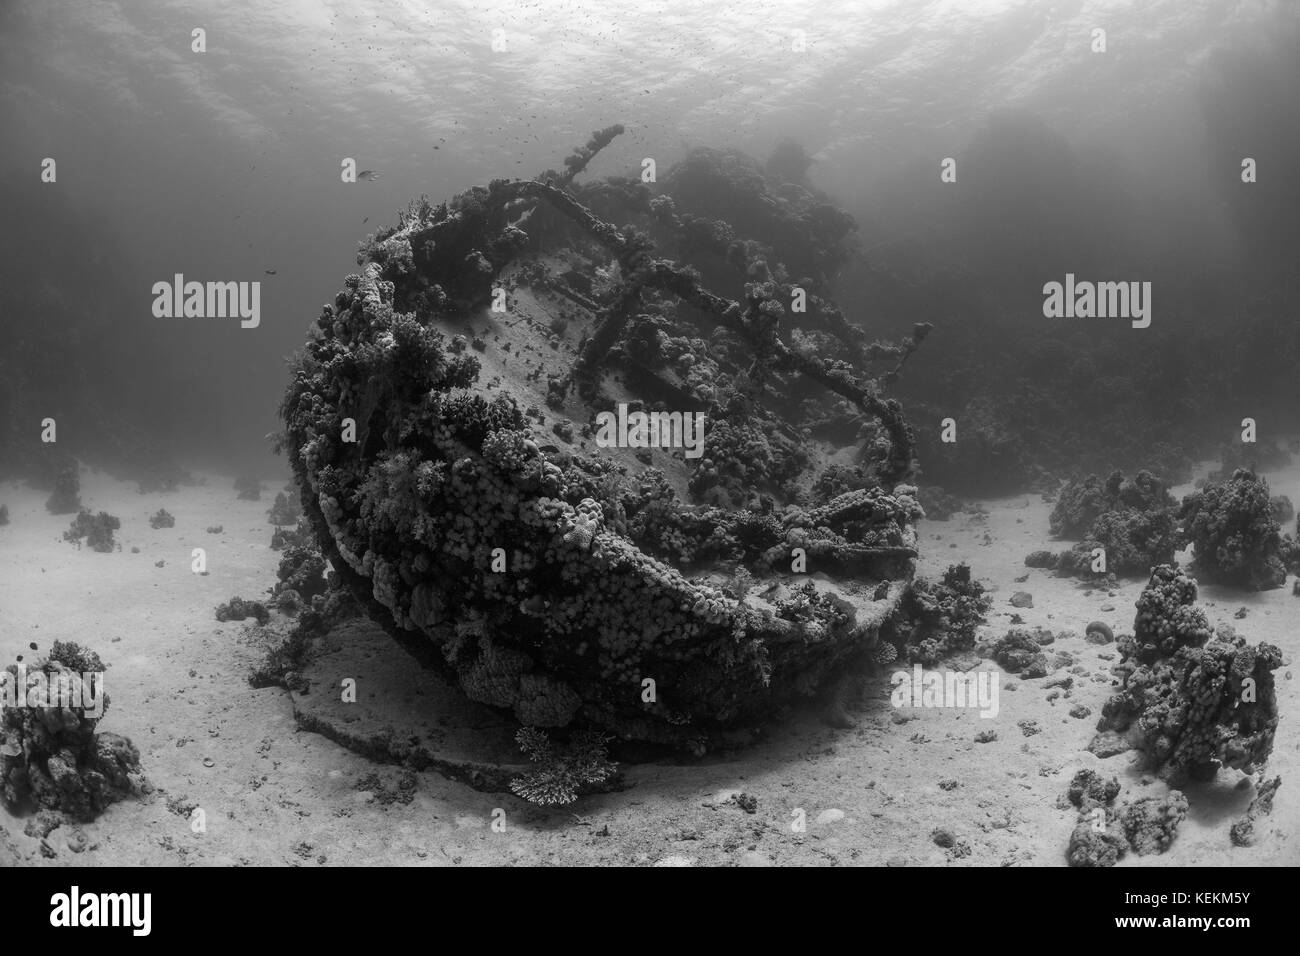 Wreck of Tug Boat Tien Sien, Fury Shoal, Red Sea, Egypt Stock Photo